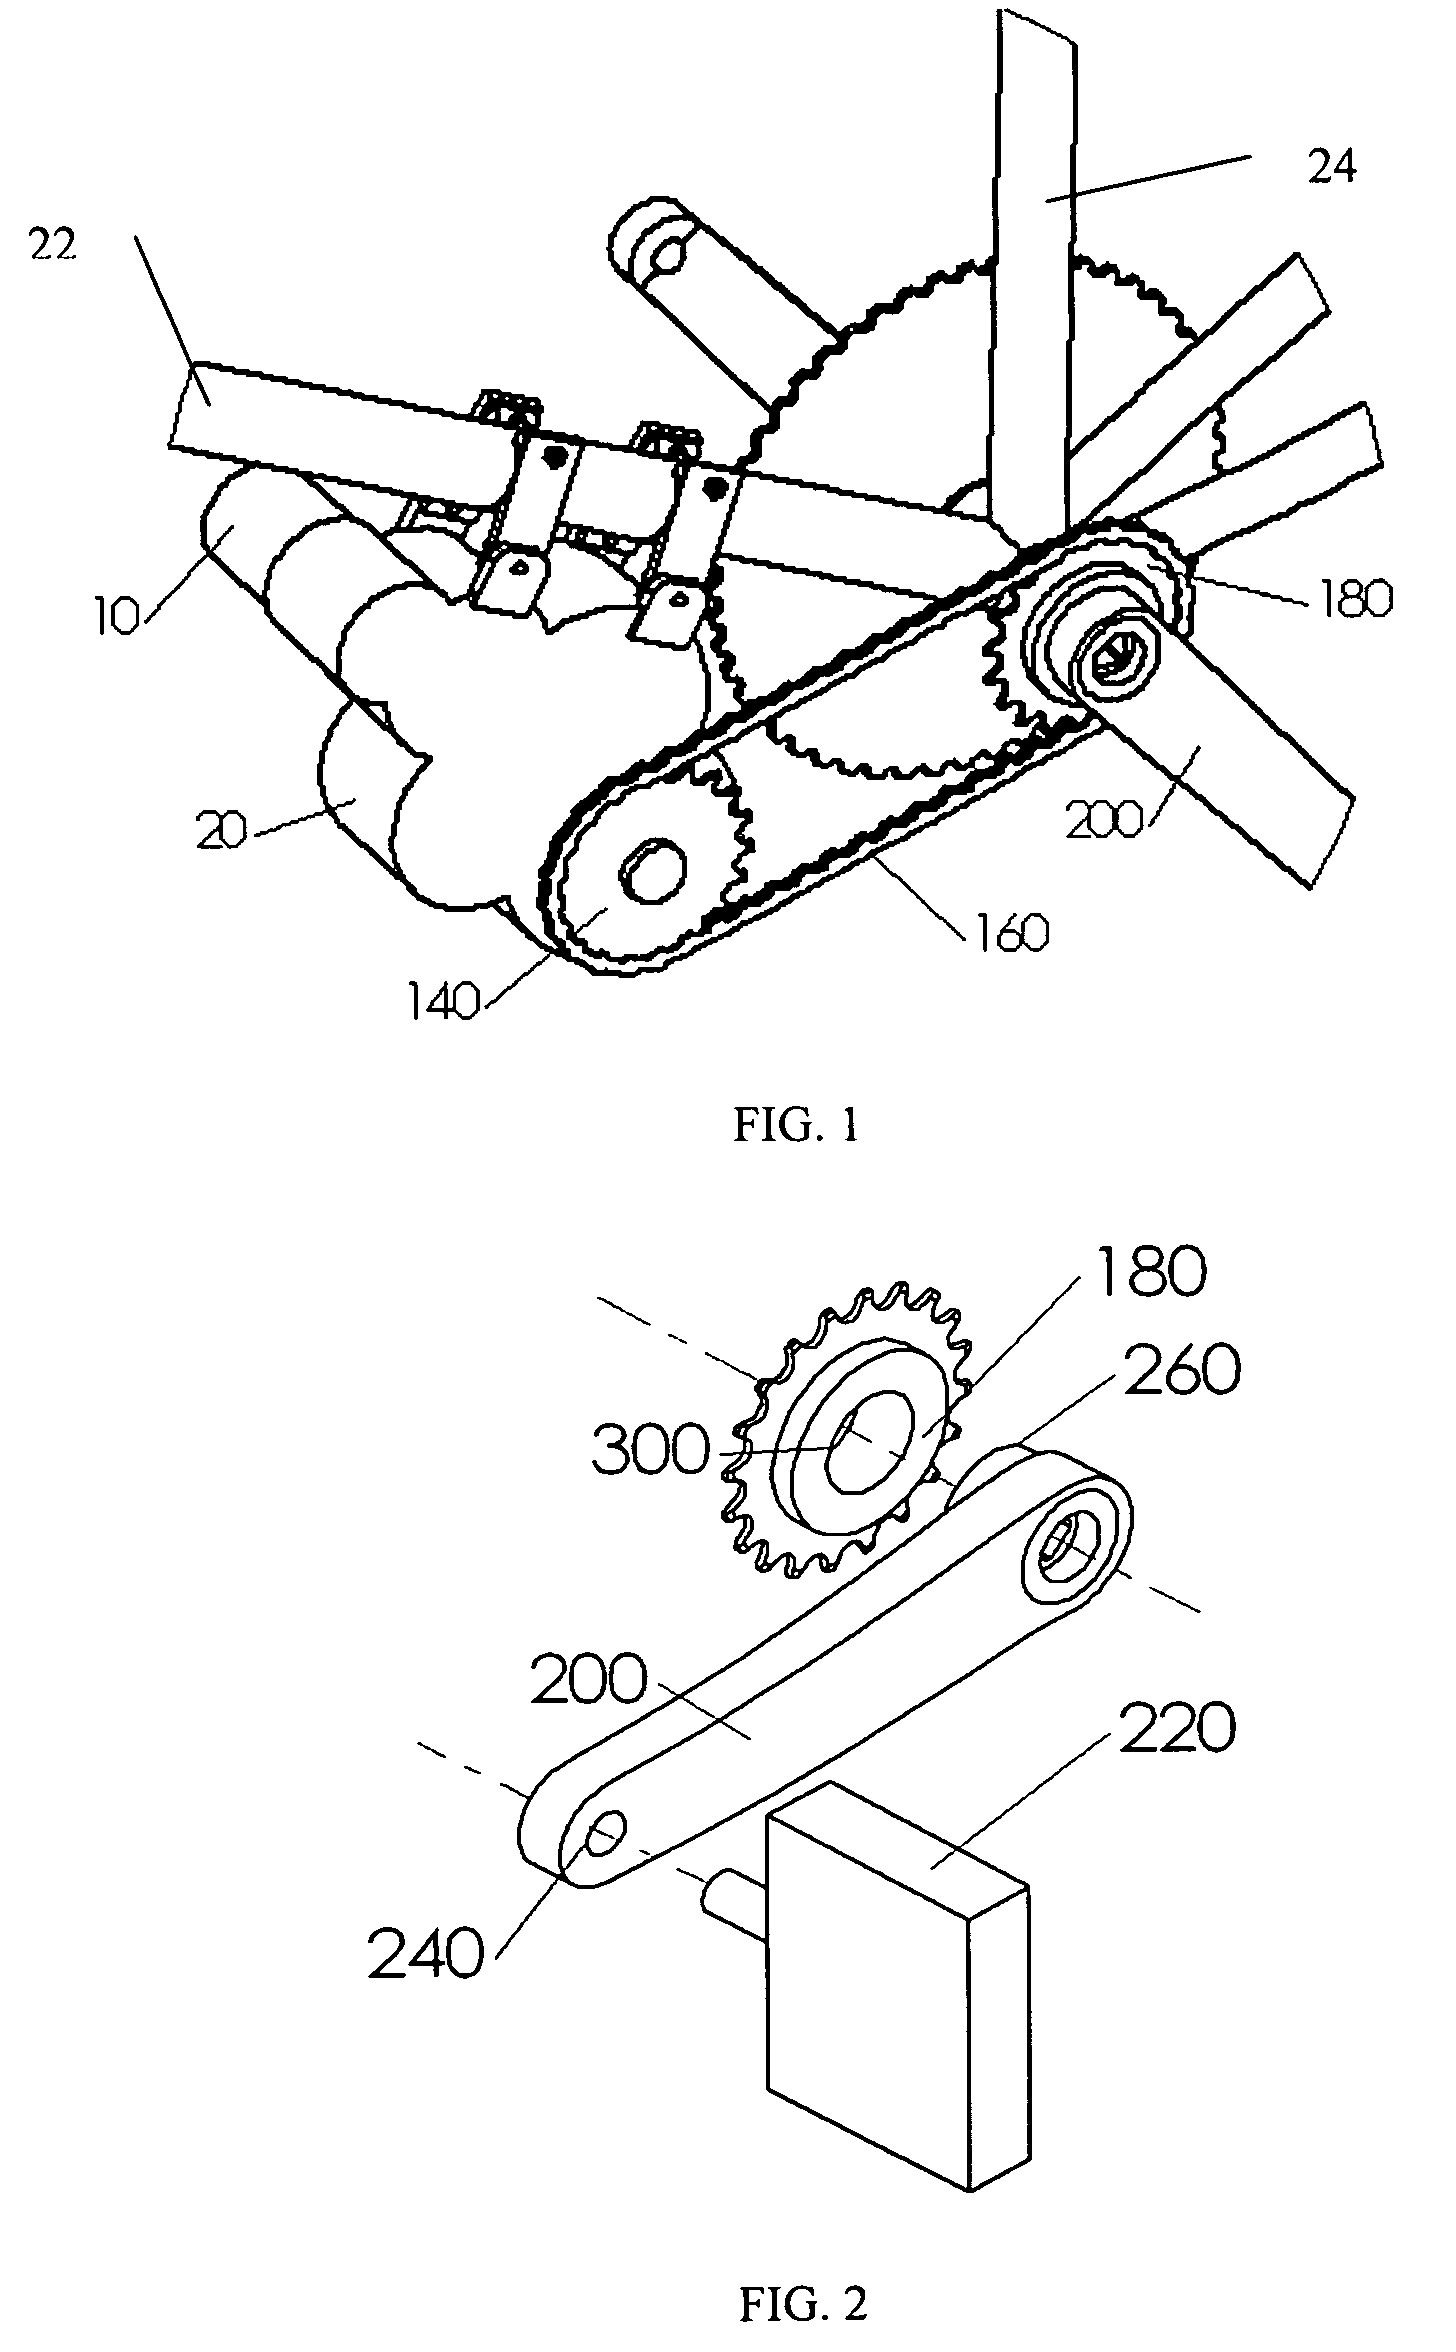 Motorized bicycle drive system using a standard freewheel and left-crank drive